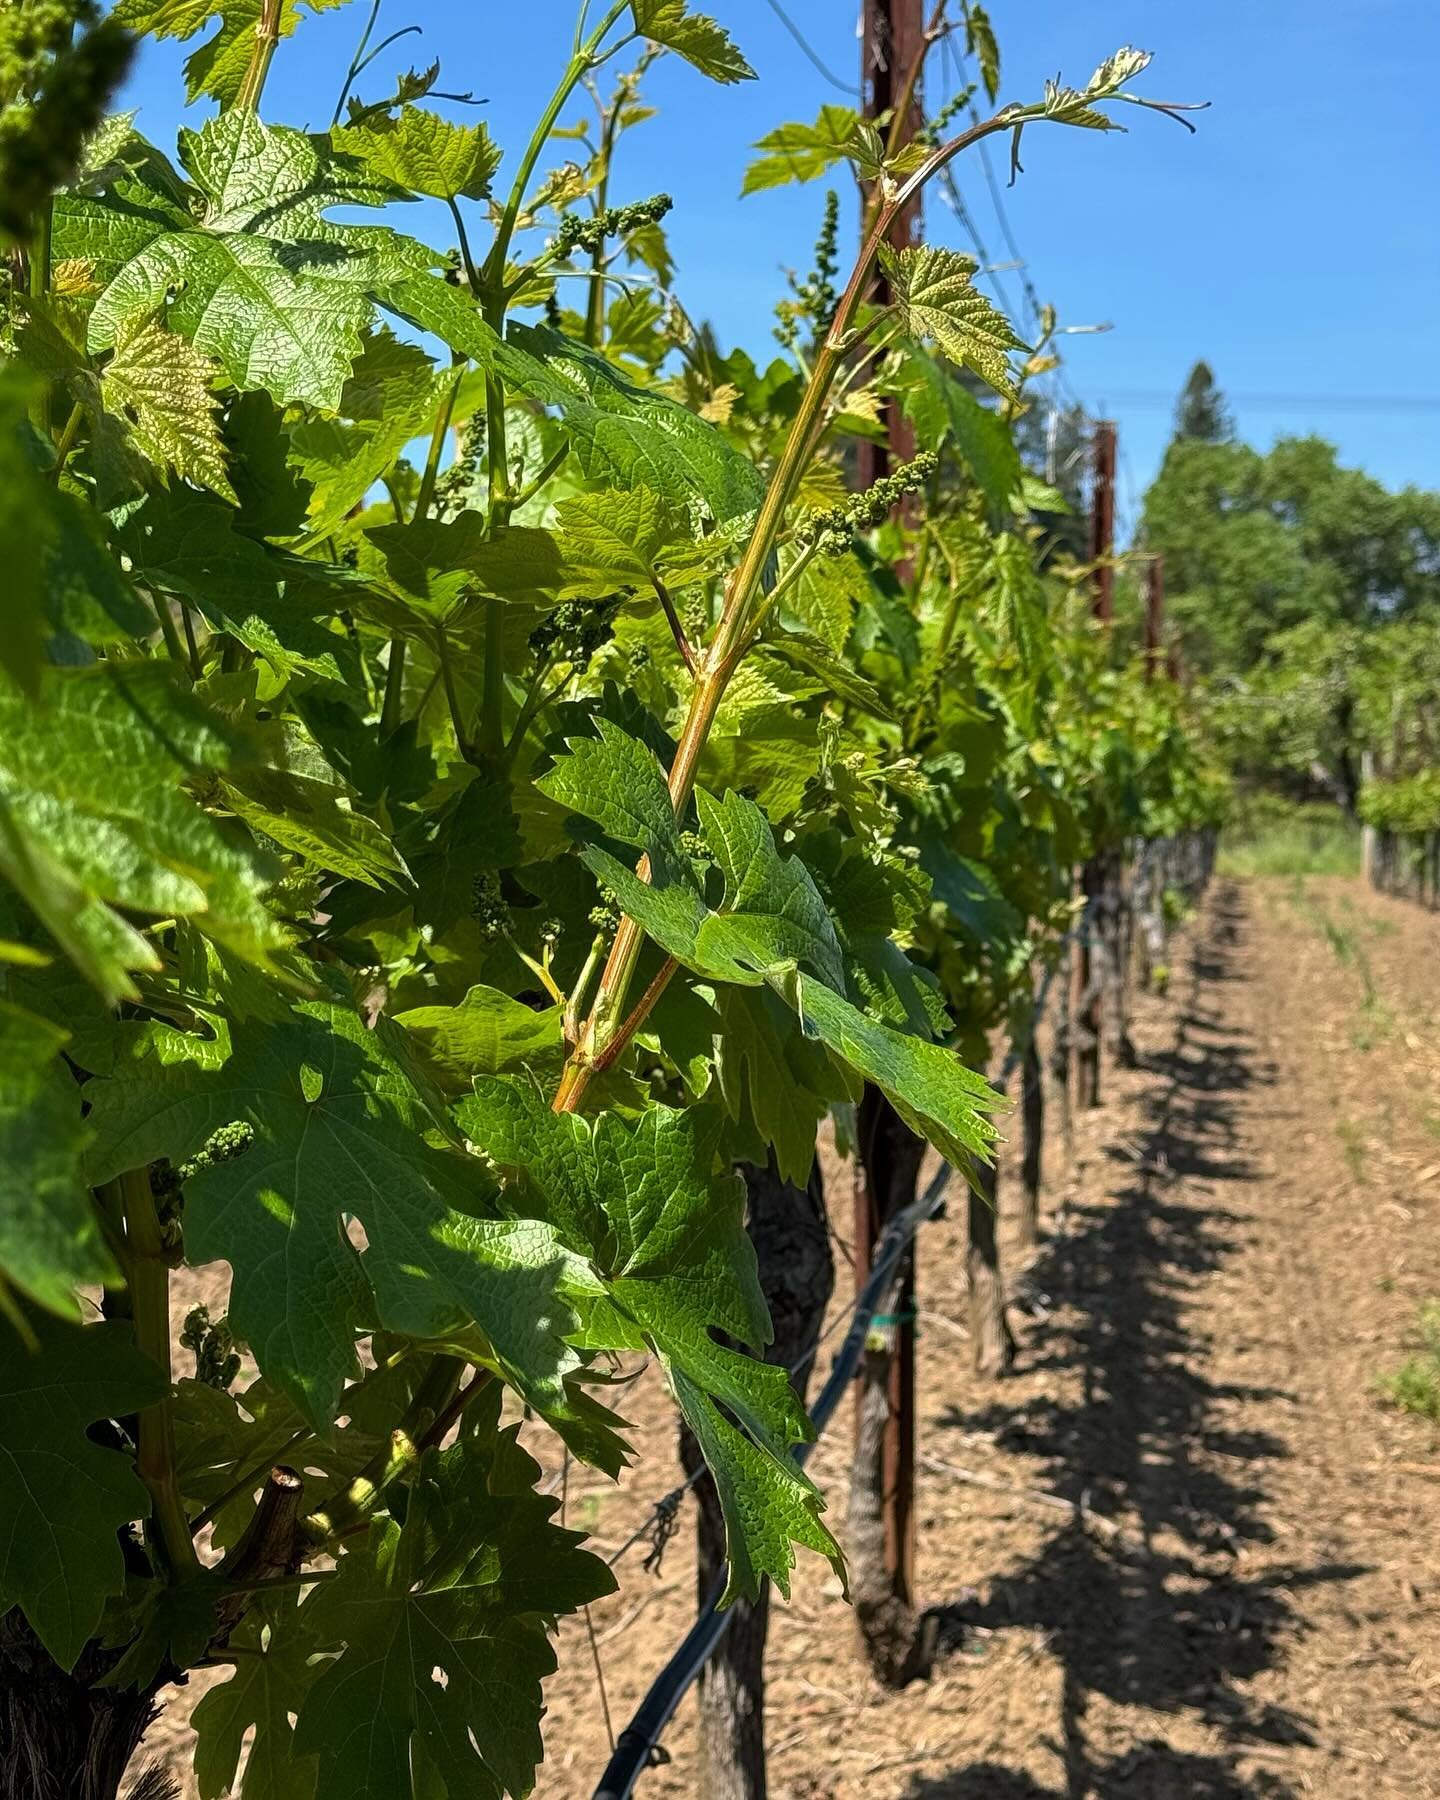 Another week down and Vinny continues to get taller 🌱 Fun Fact: Every vineyard acre produces roughly 1.5-7 tons of grapes. Every ton of grapes makes roughly 150 gallons of wine 😍🍷

Remember to turn our post notifications on so you won&rsquo;t miss